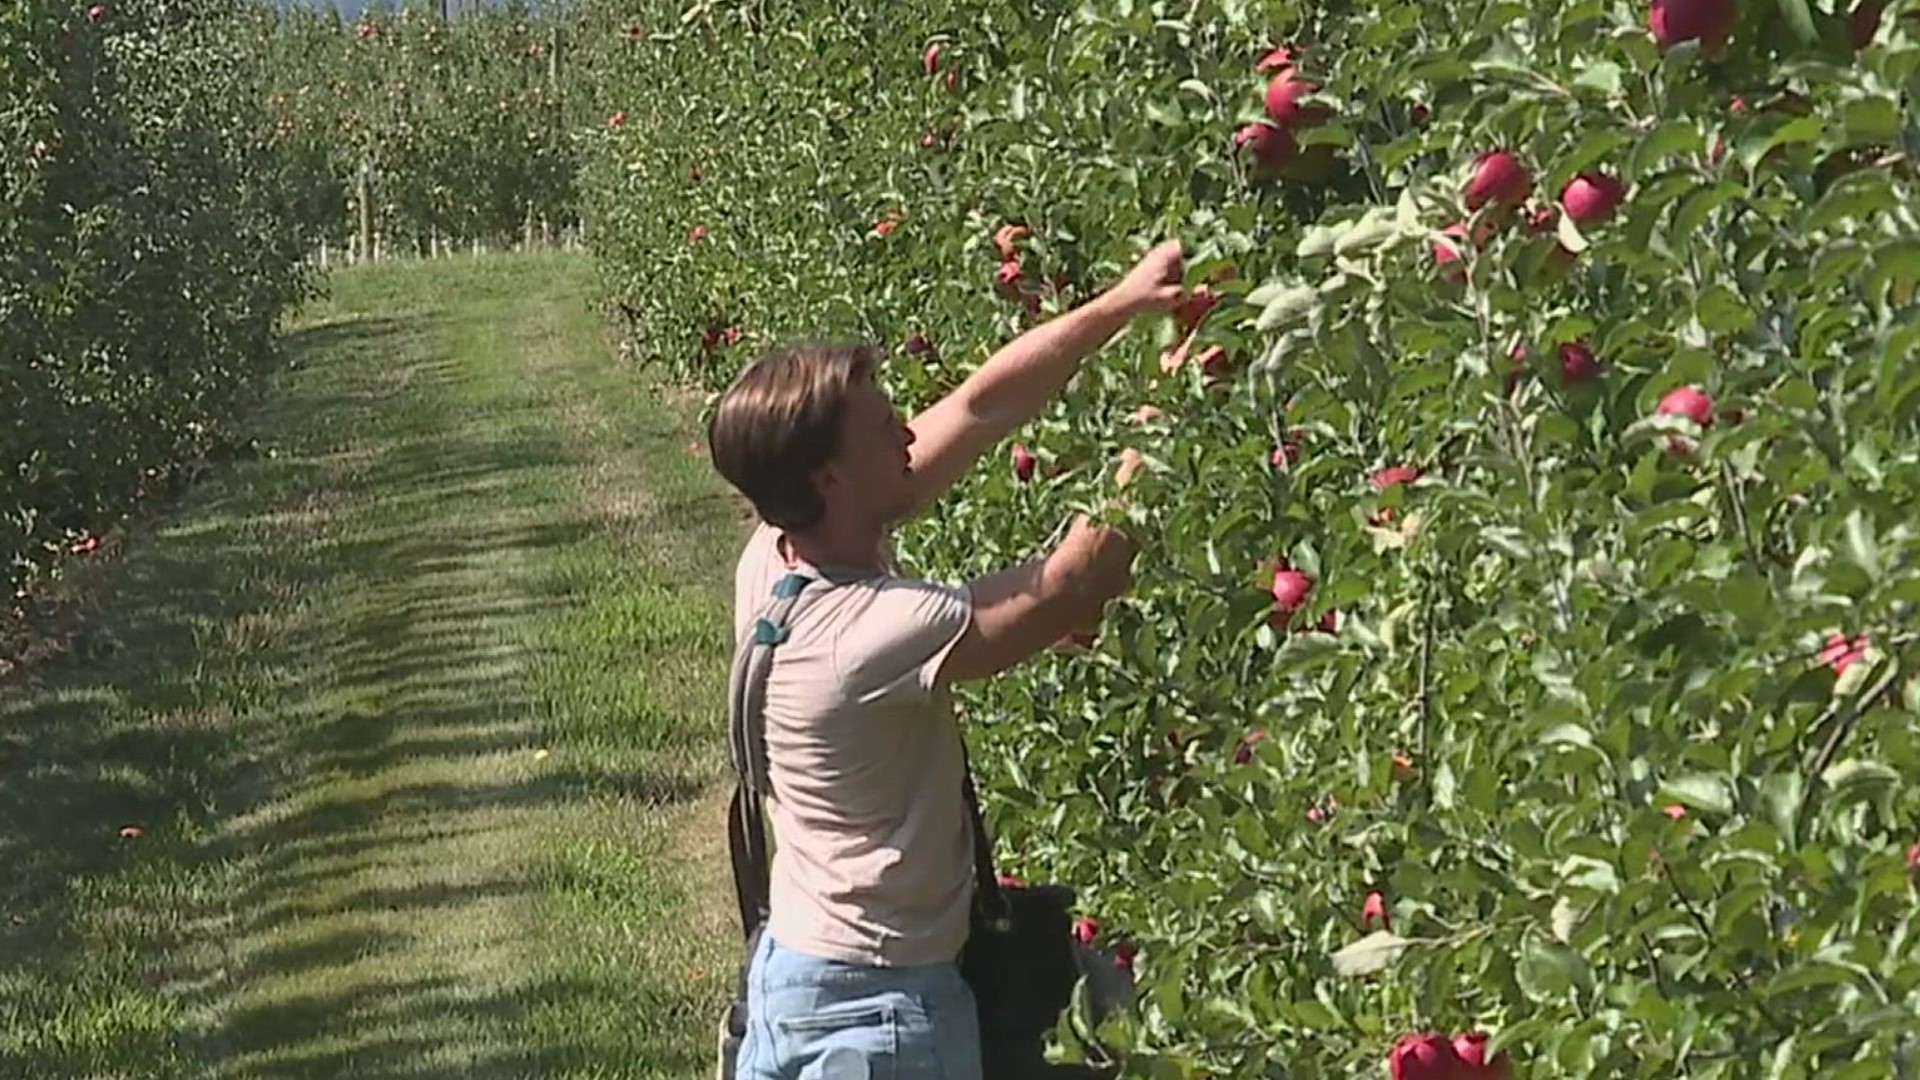 FOX43's Tyler Hatfield went to Flinchbaugh's Orchards in Hellam Township, York County, to learn what it takes to harvest and grade apples for the market.